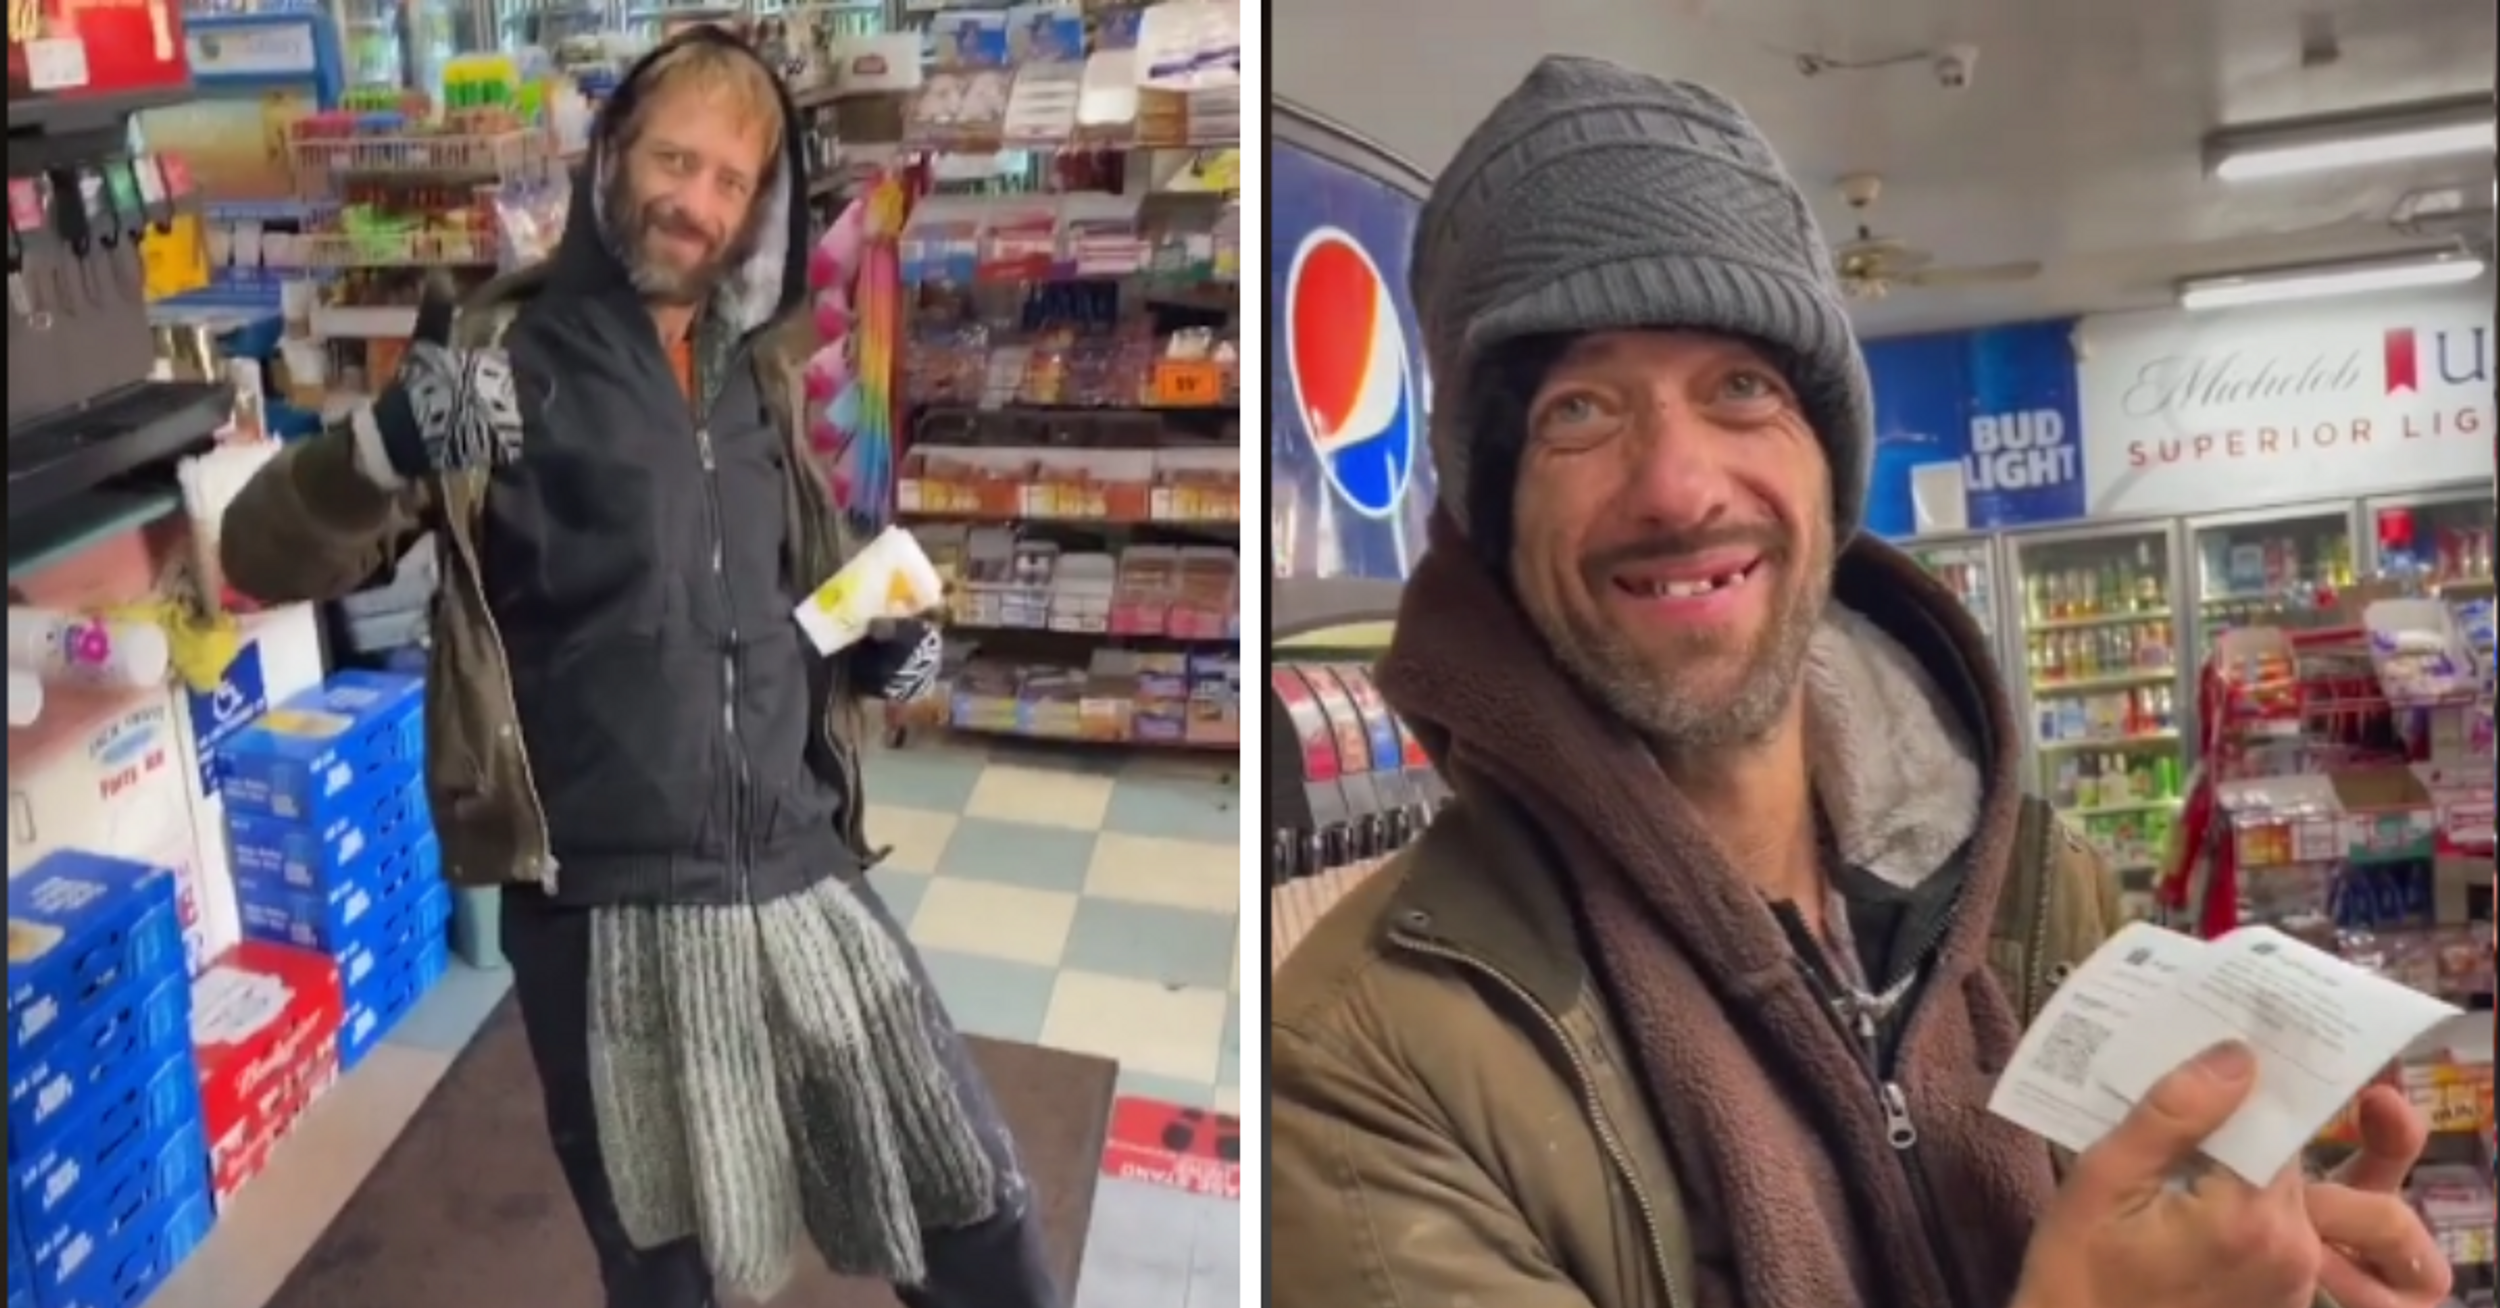 Homeless Man Overwhelmed After Being Surprised With Gifts Sent By Kind Strangers On TikTok